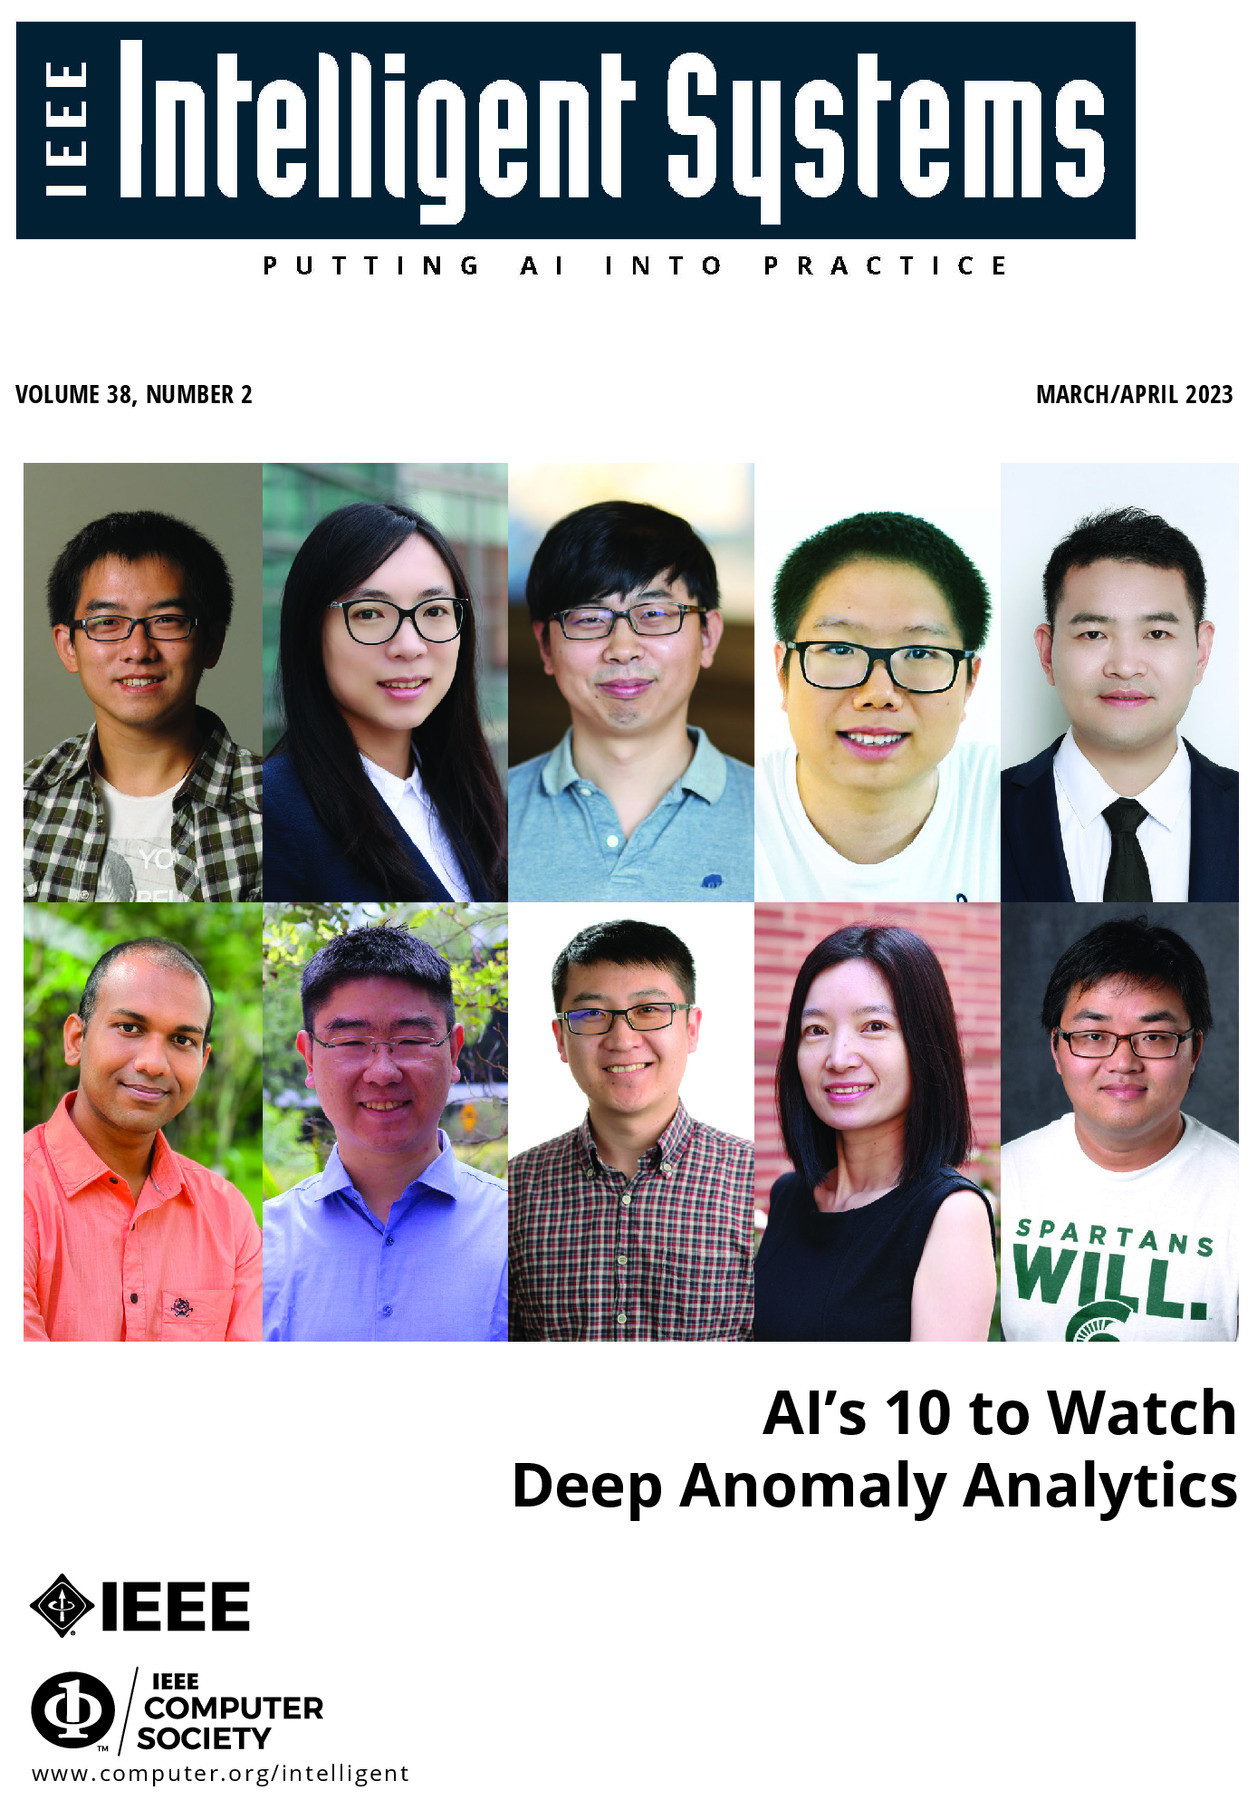 IEEE Intelligent Systems March/April 2023 Vol. 38 No. 2